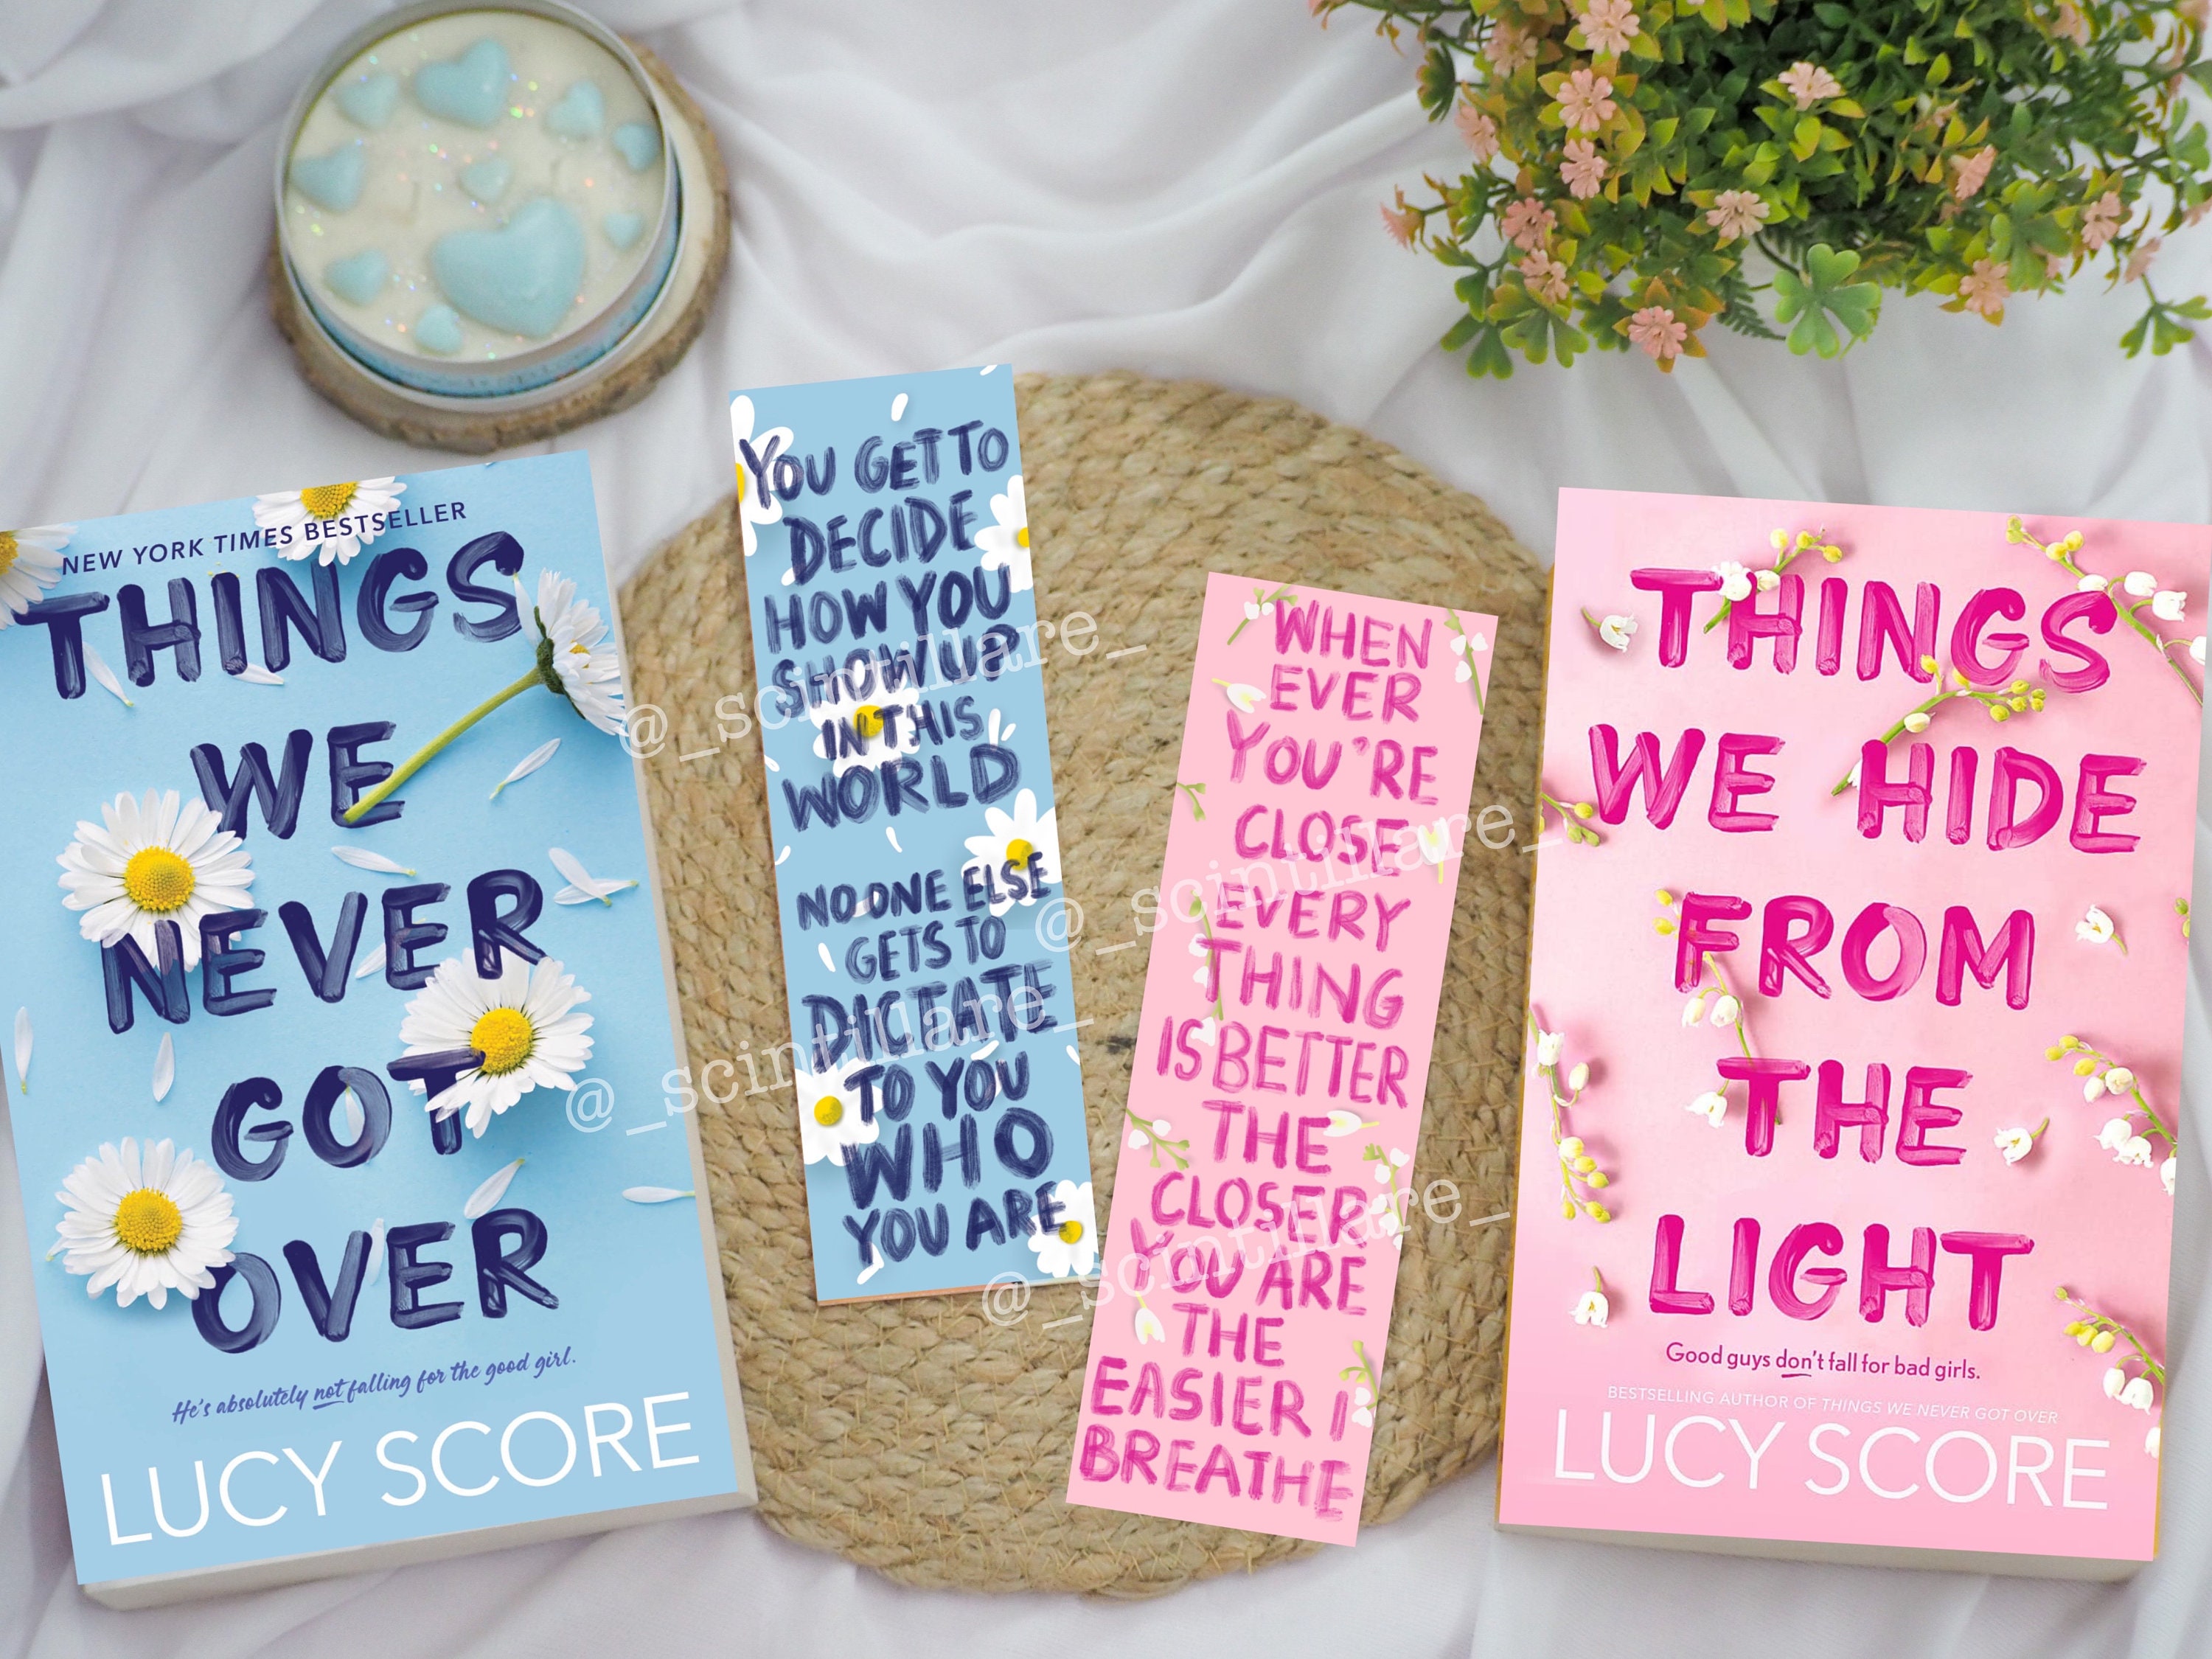 Things We Never Got Over Bookmark Things We Hide From Light Lucy Score  Bookmark Romance Bookmark 